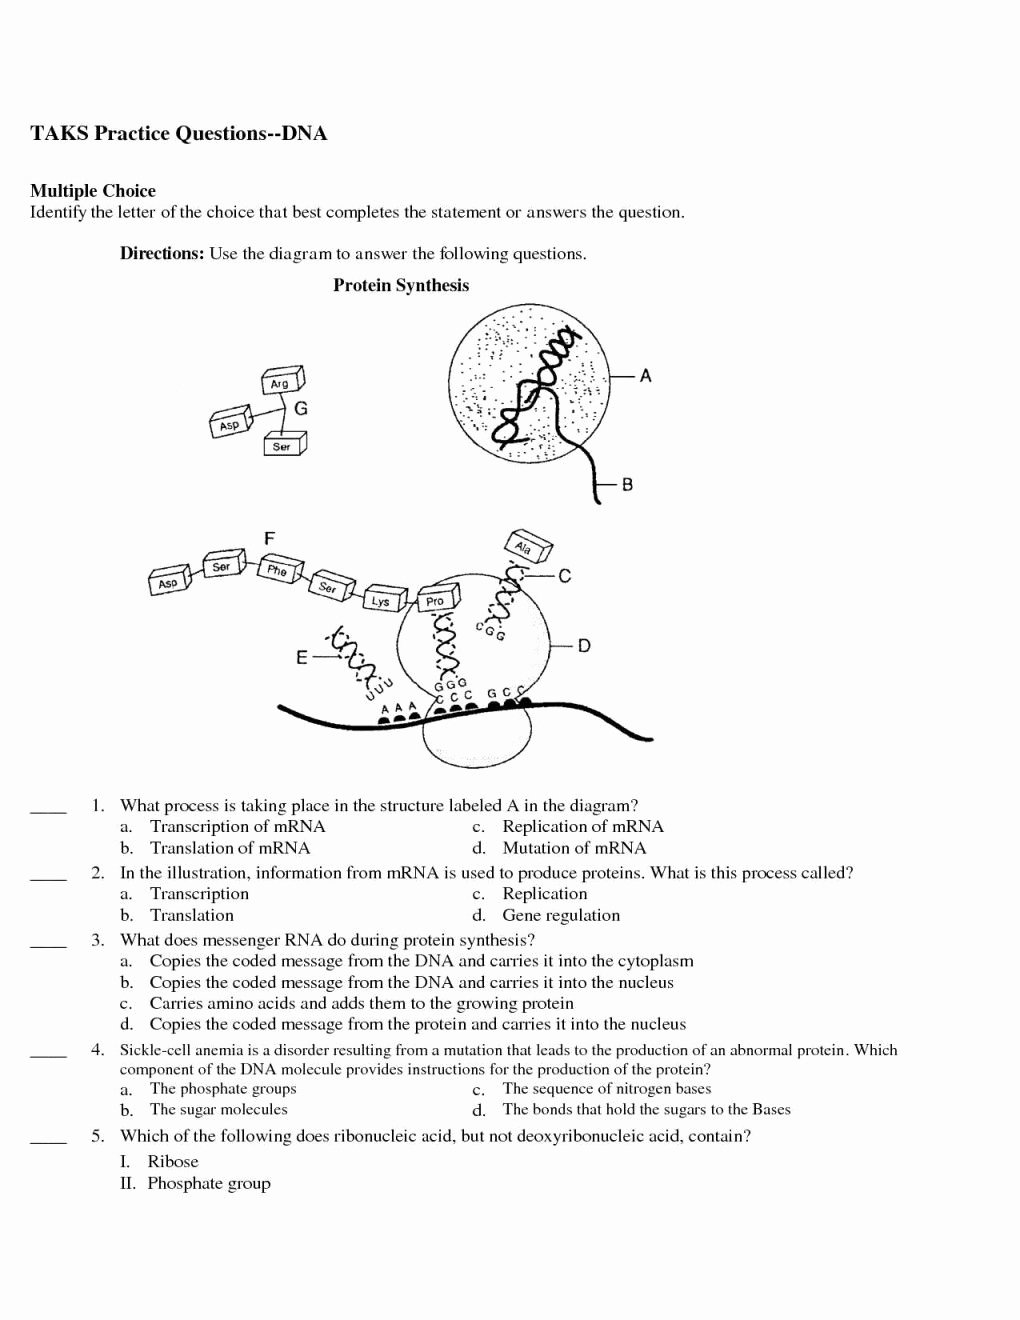 Protein Synthesis Worksheet Answer Key Fresh Protein Synthesis Worksheet Answer Key